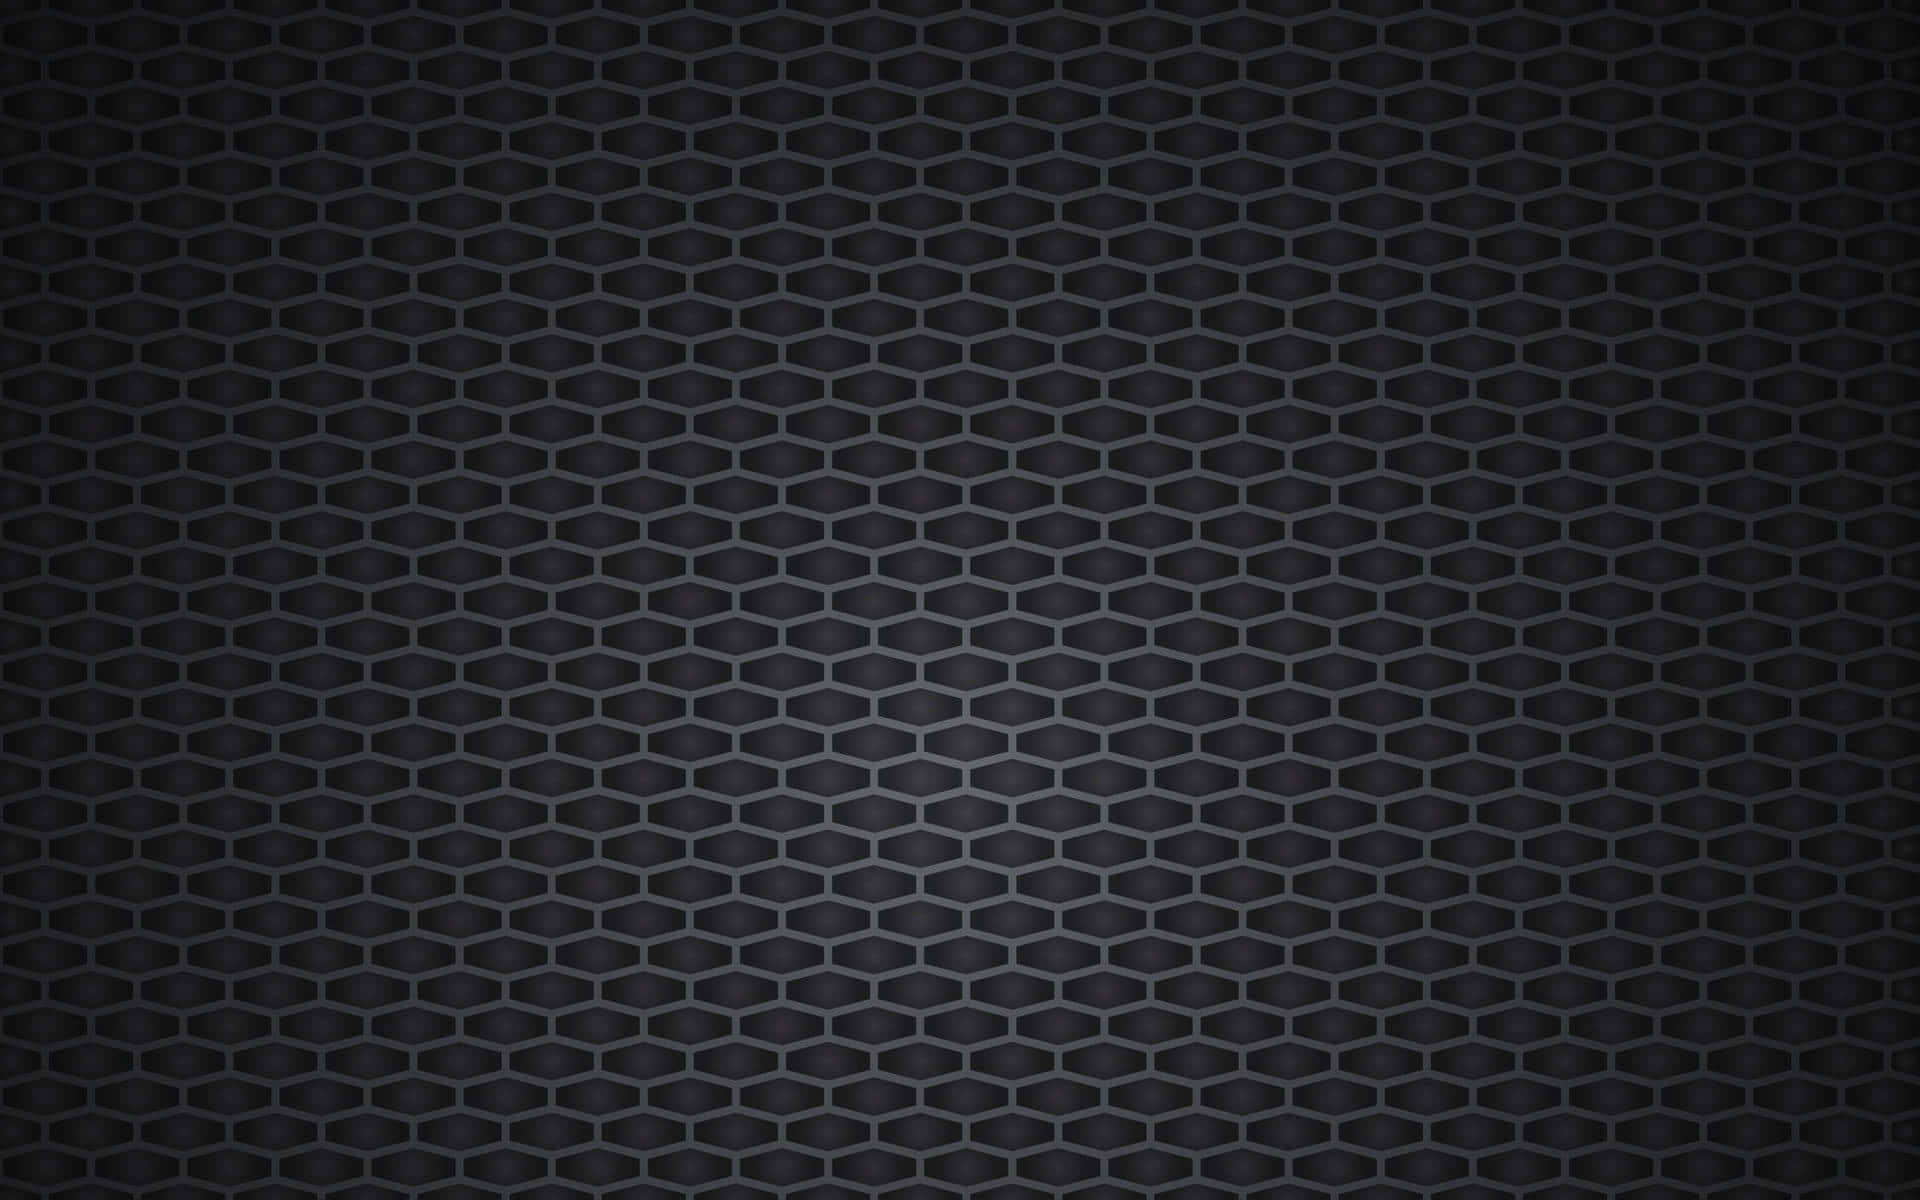 Get creative with this bold black pattern background